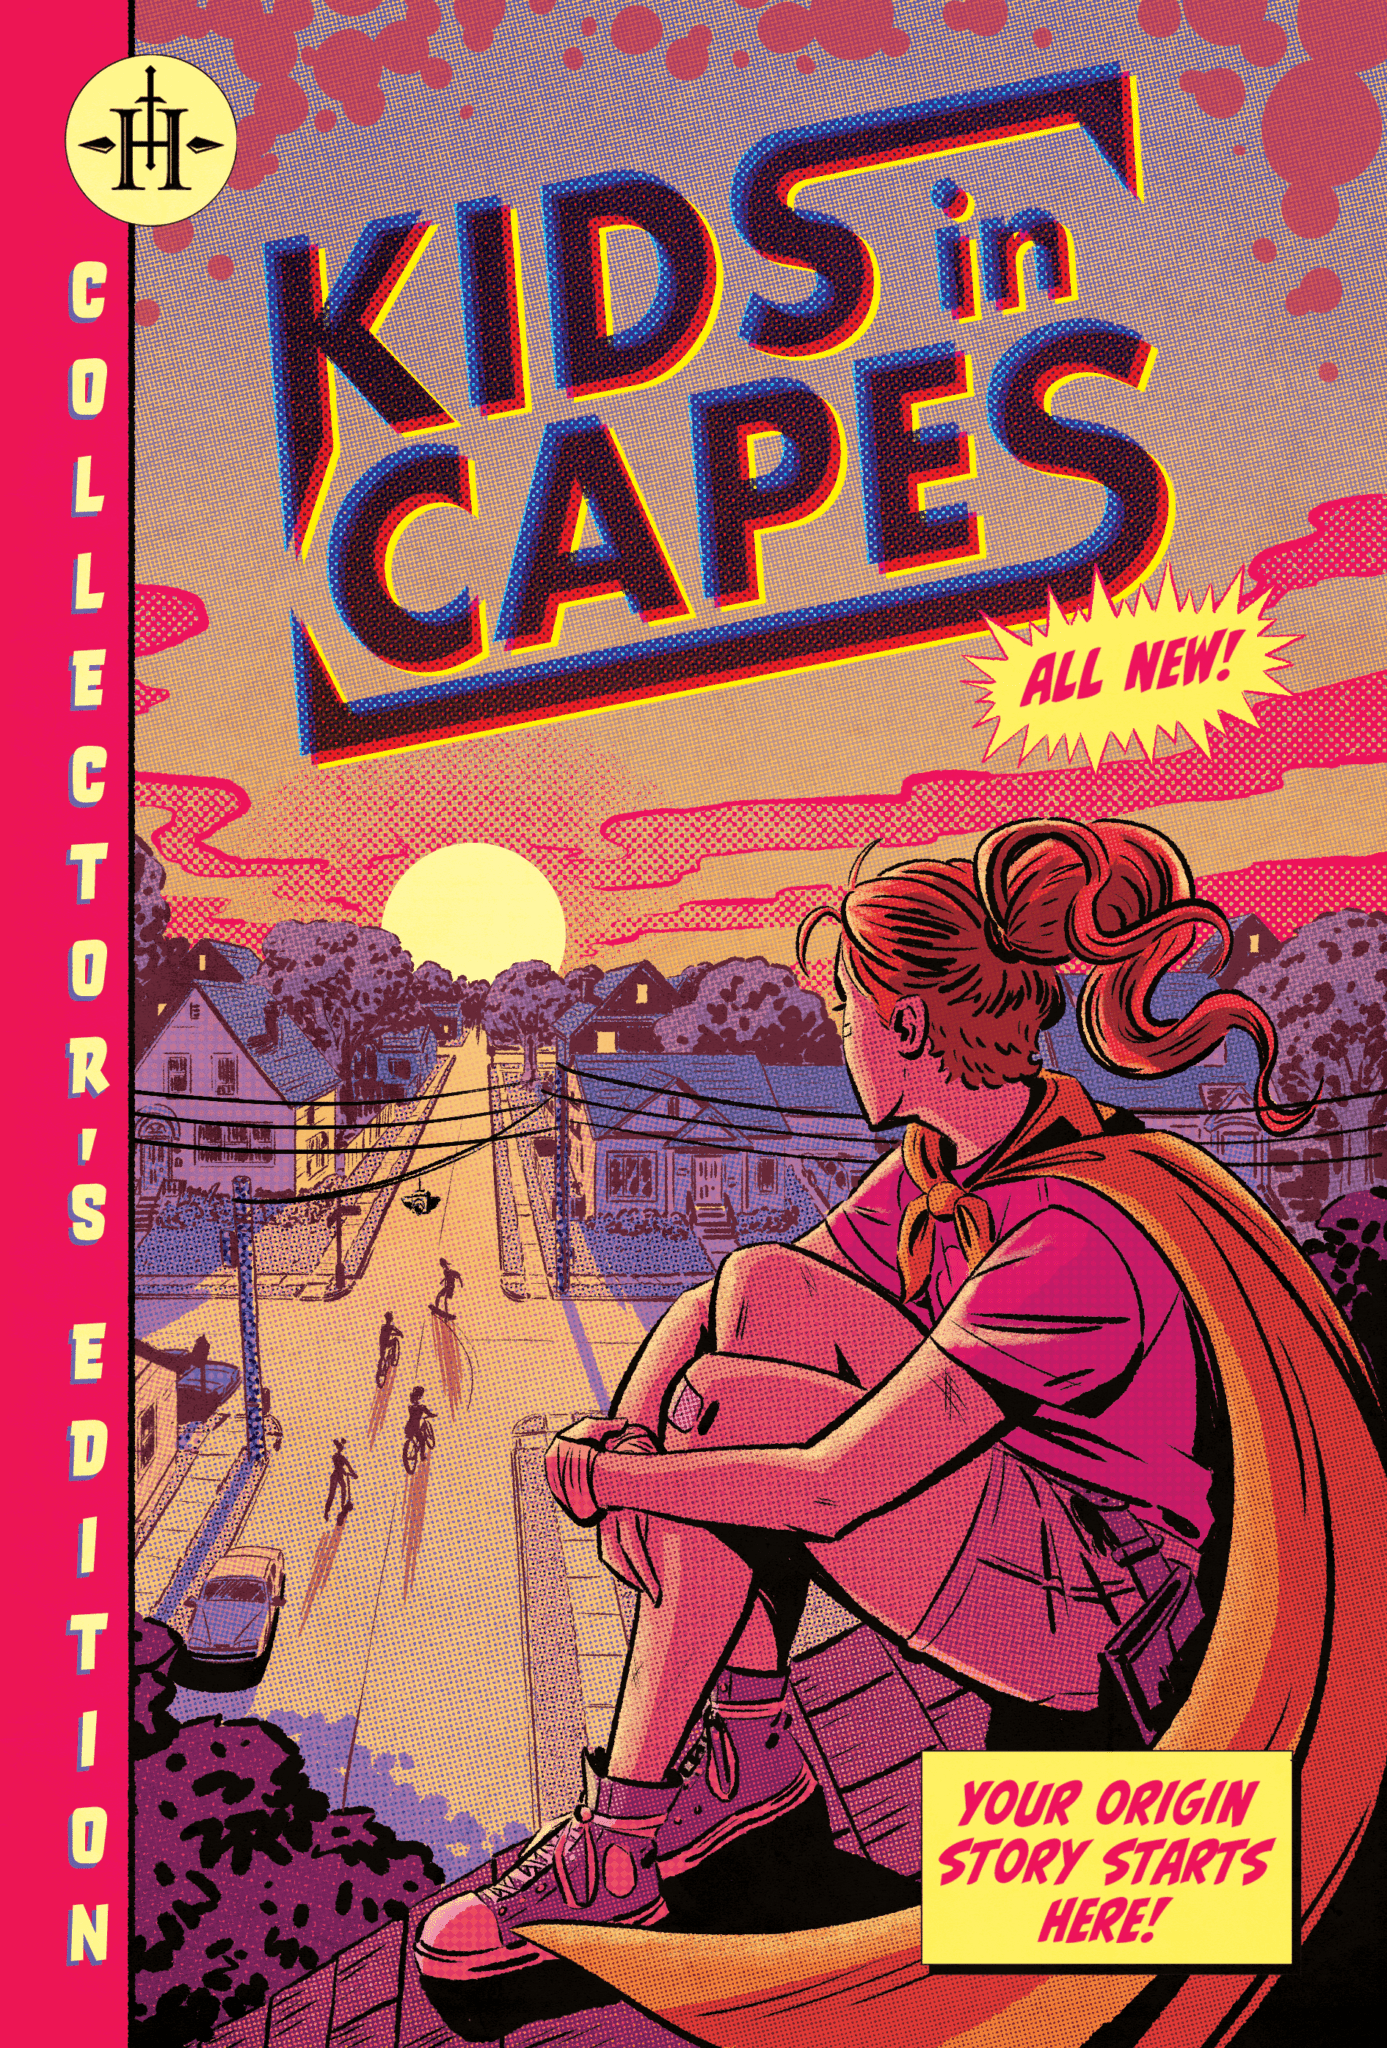 Kids In Capes collector's edition cover by Sean Peacock